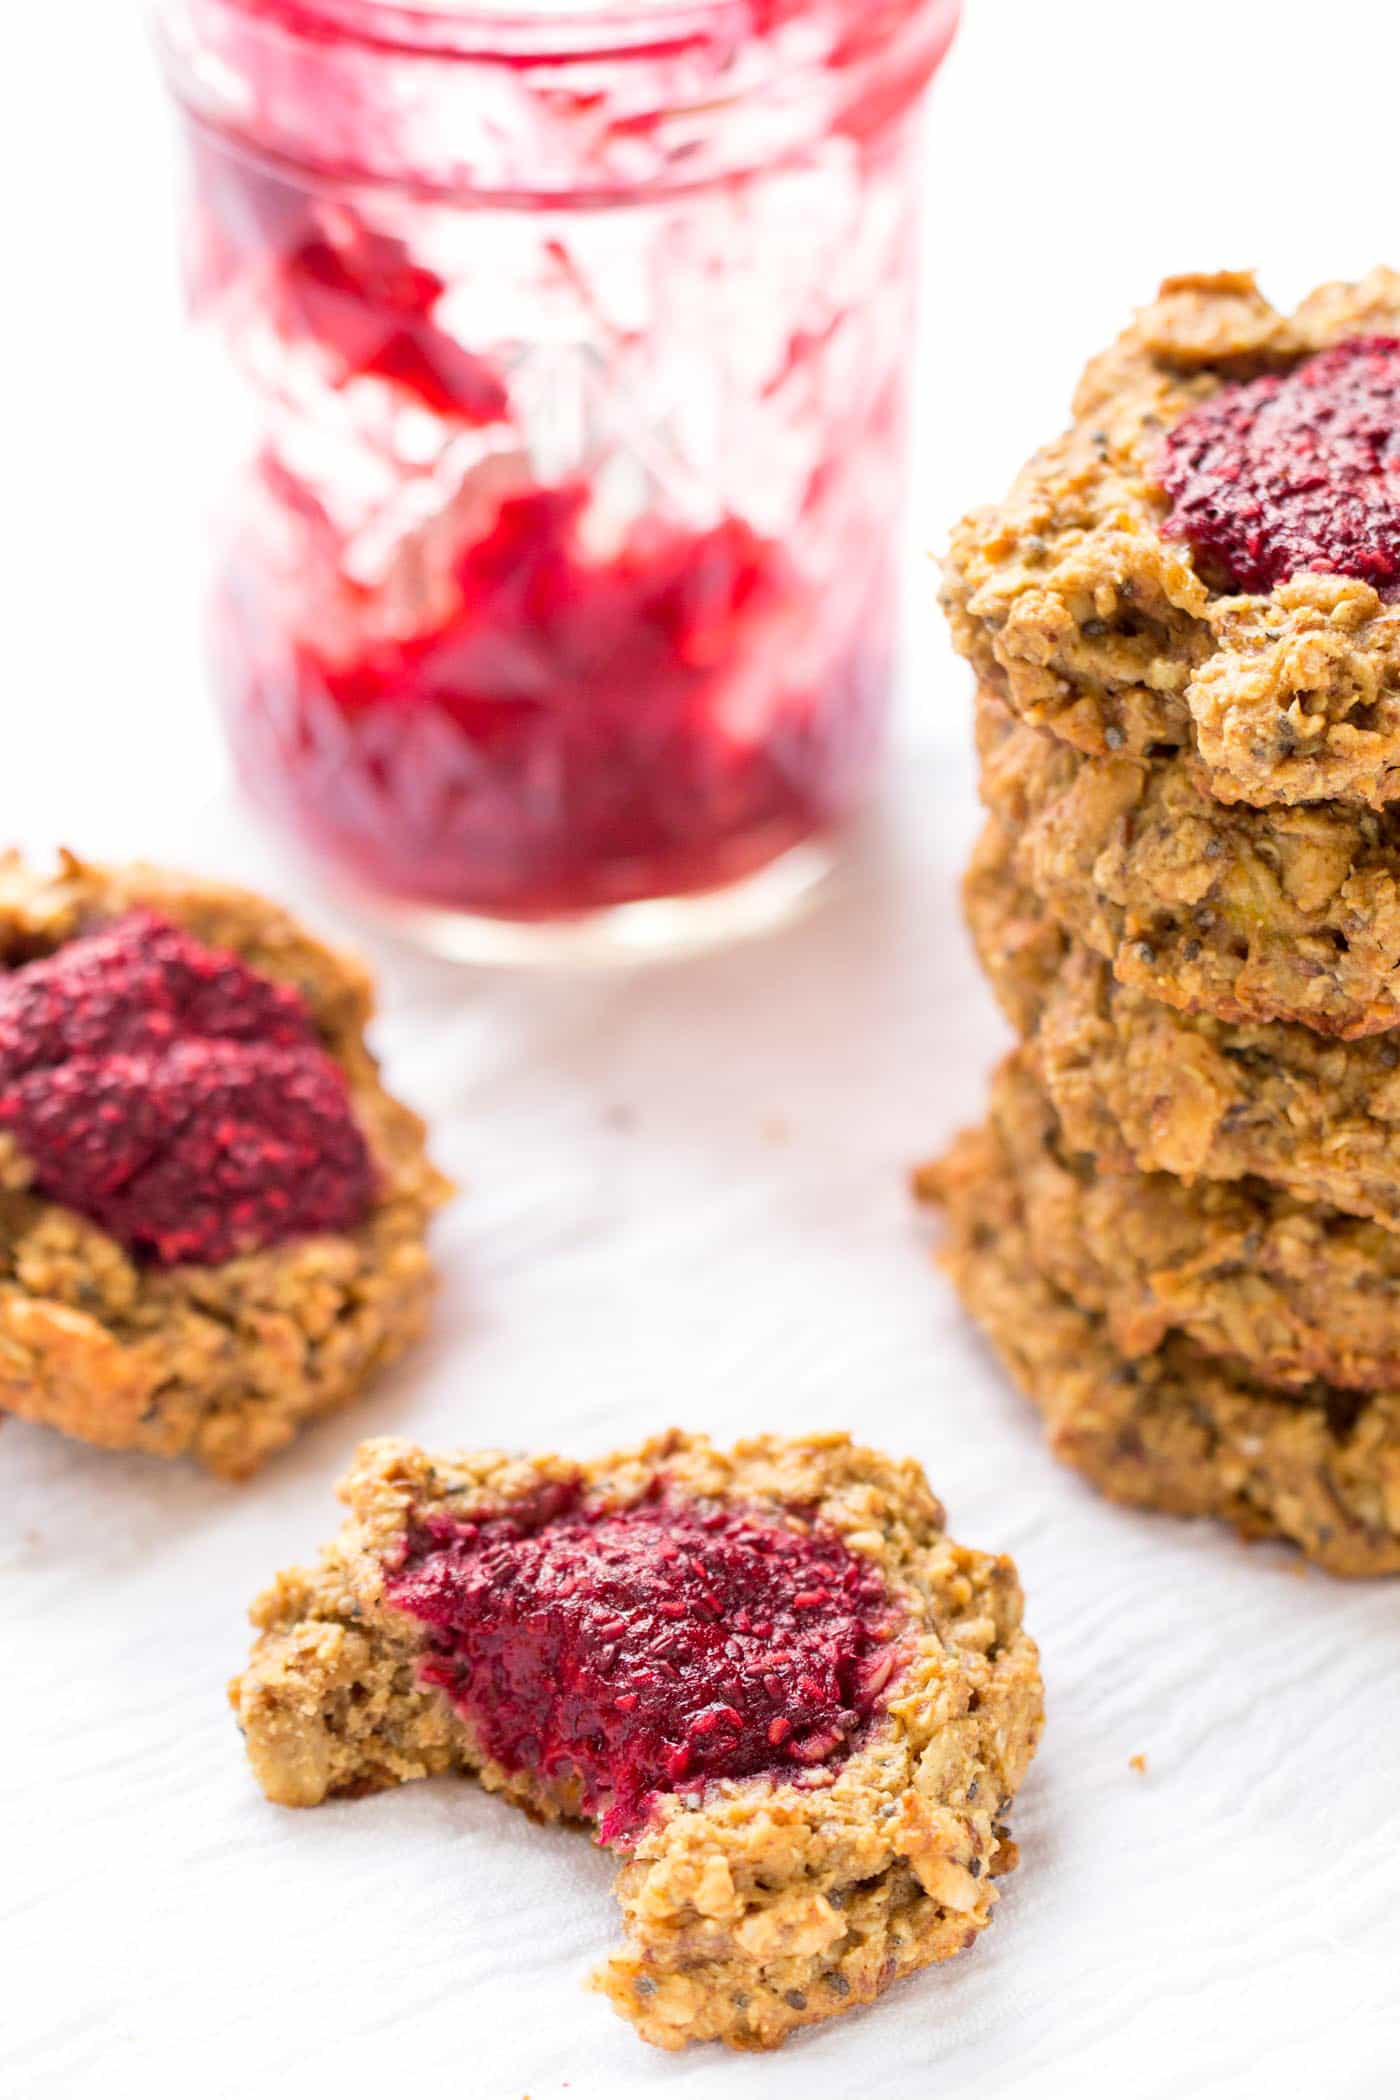 Quinoa Breakfast Cookies...that taste like PB + J sandwiches! These DELICIOUS cookies are the perfect way to start the day - packed with fiber, protein, healthy fats and sweetened only with natural sugars